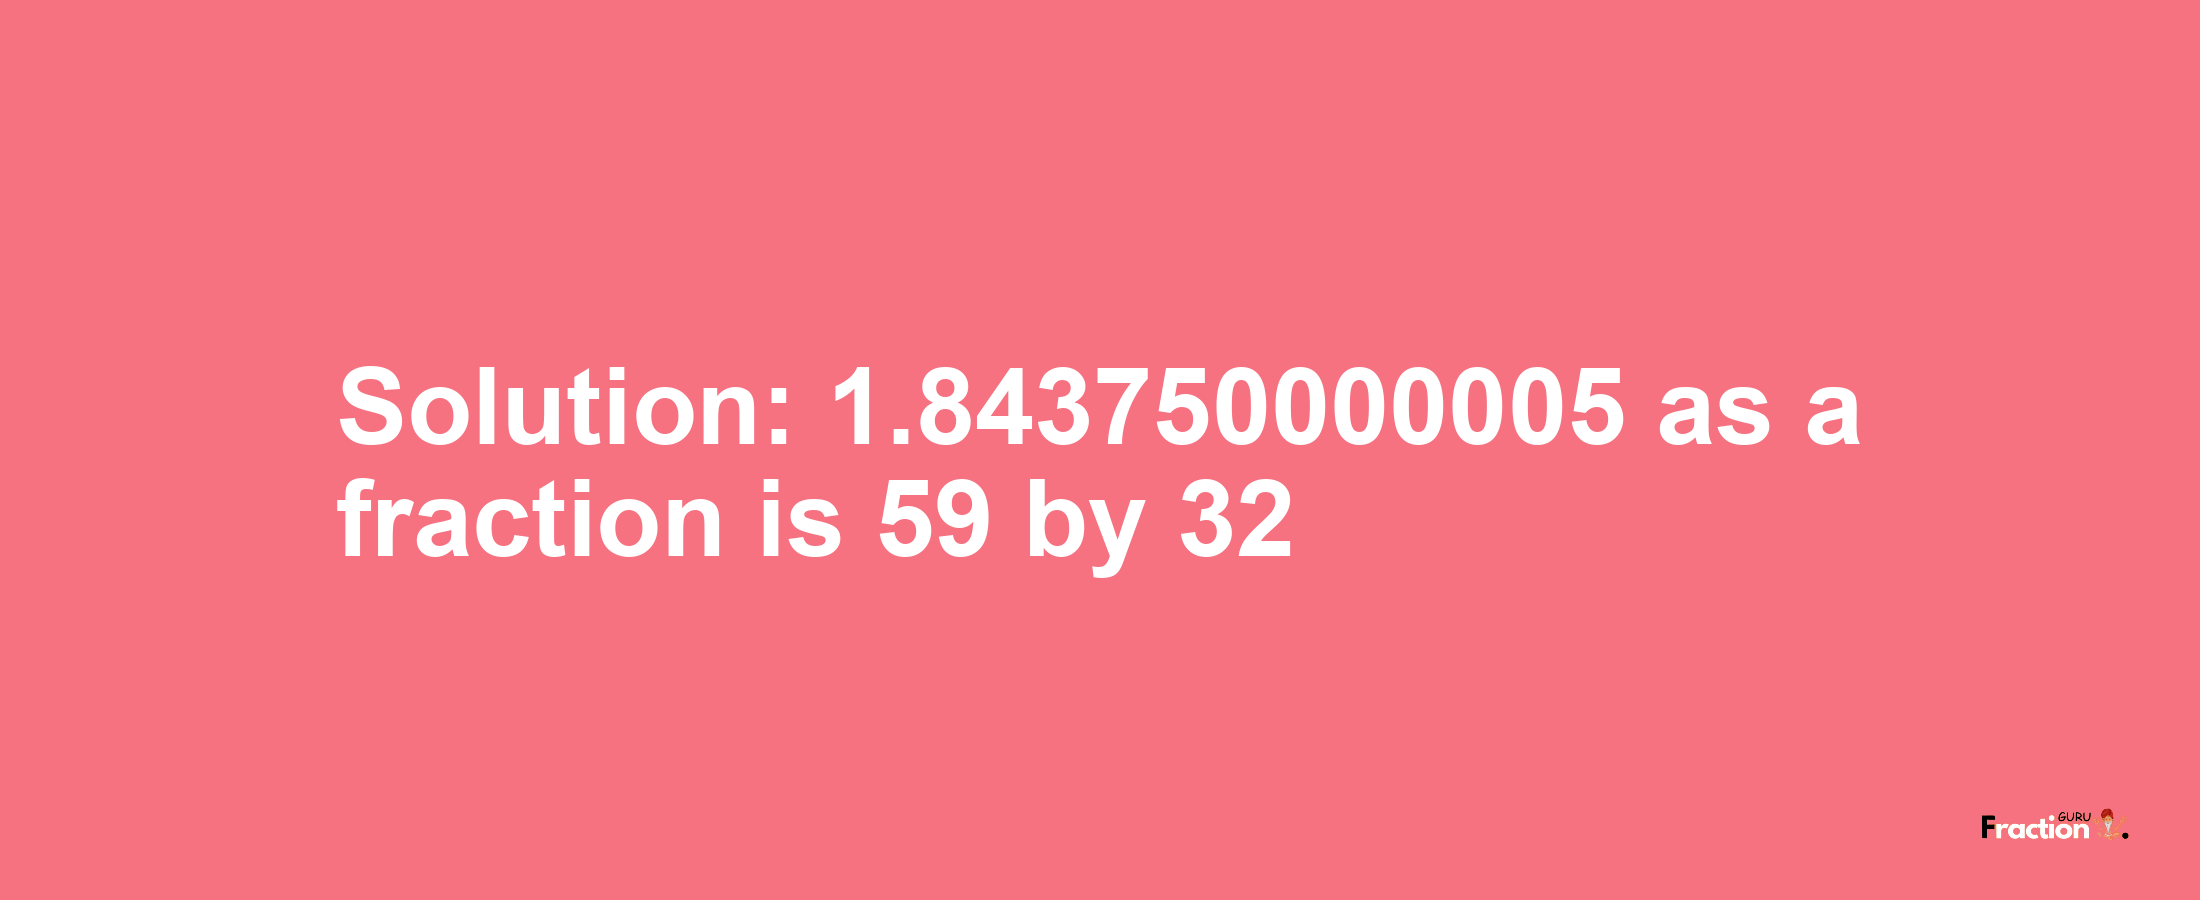 Solution:1.843750000005 as a fraction is 59/32